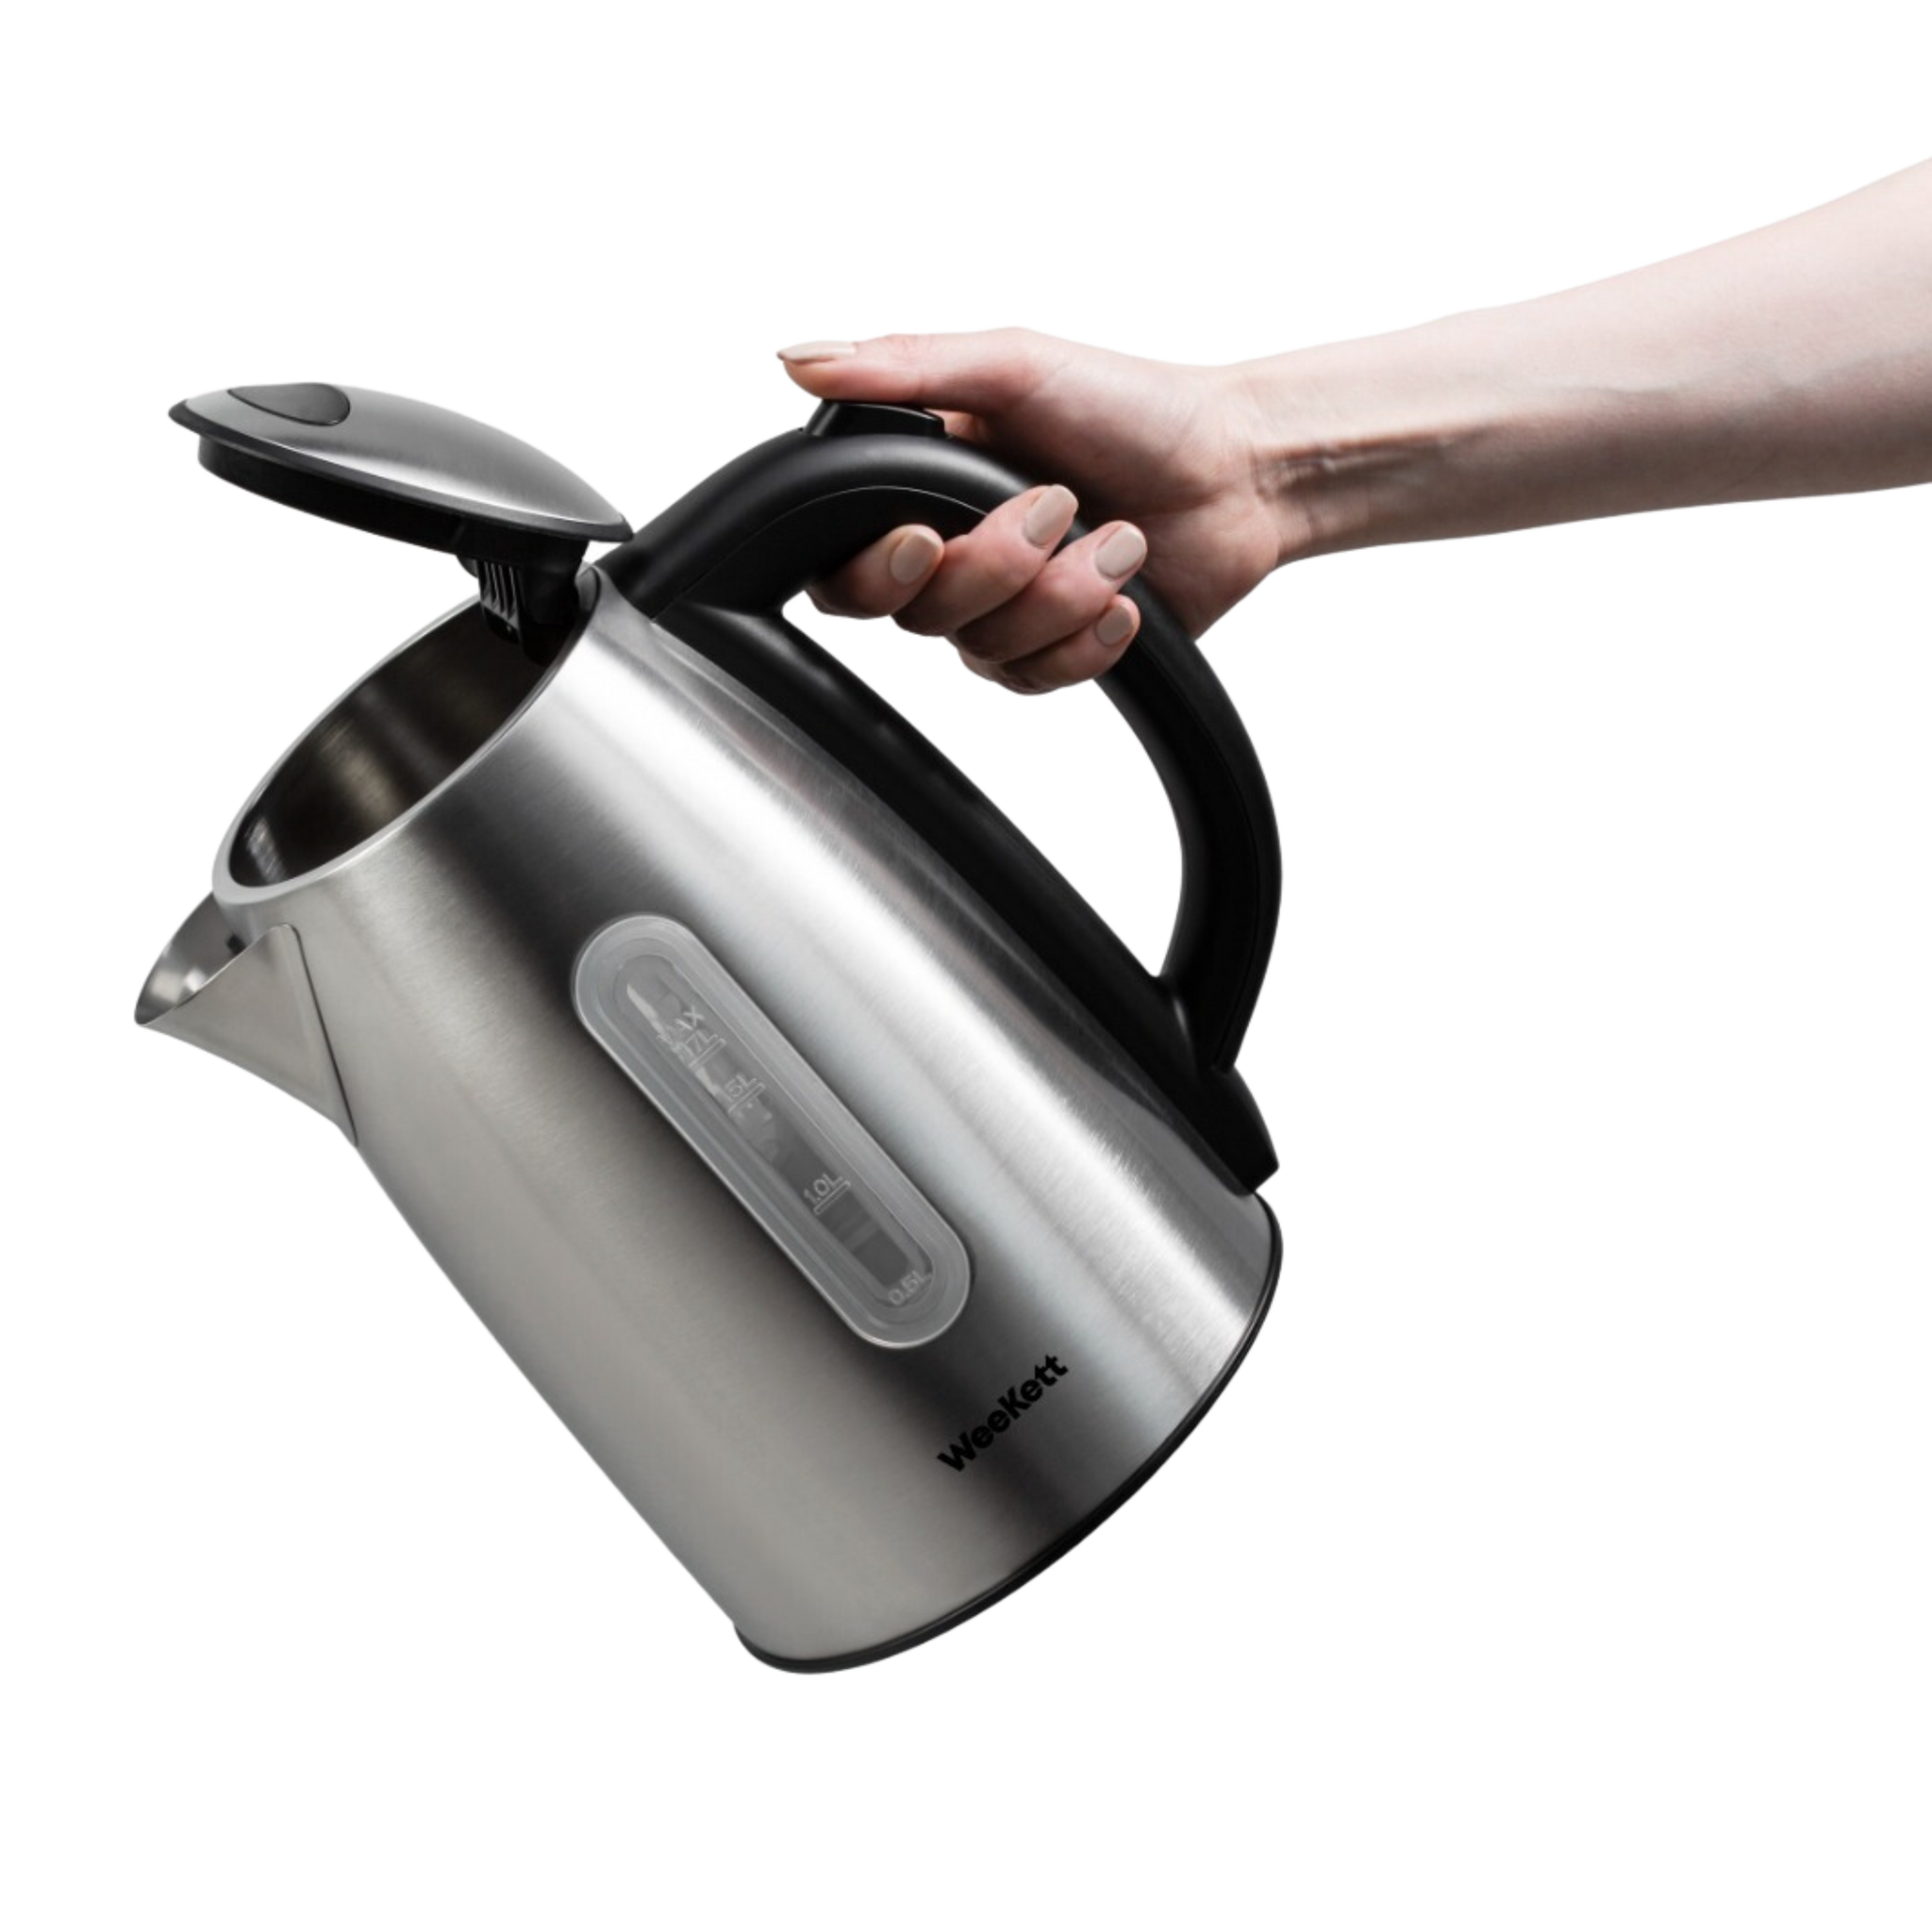 Load image into Gallery viewer, Smart Kettle by WeeKett - Alexa compatible